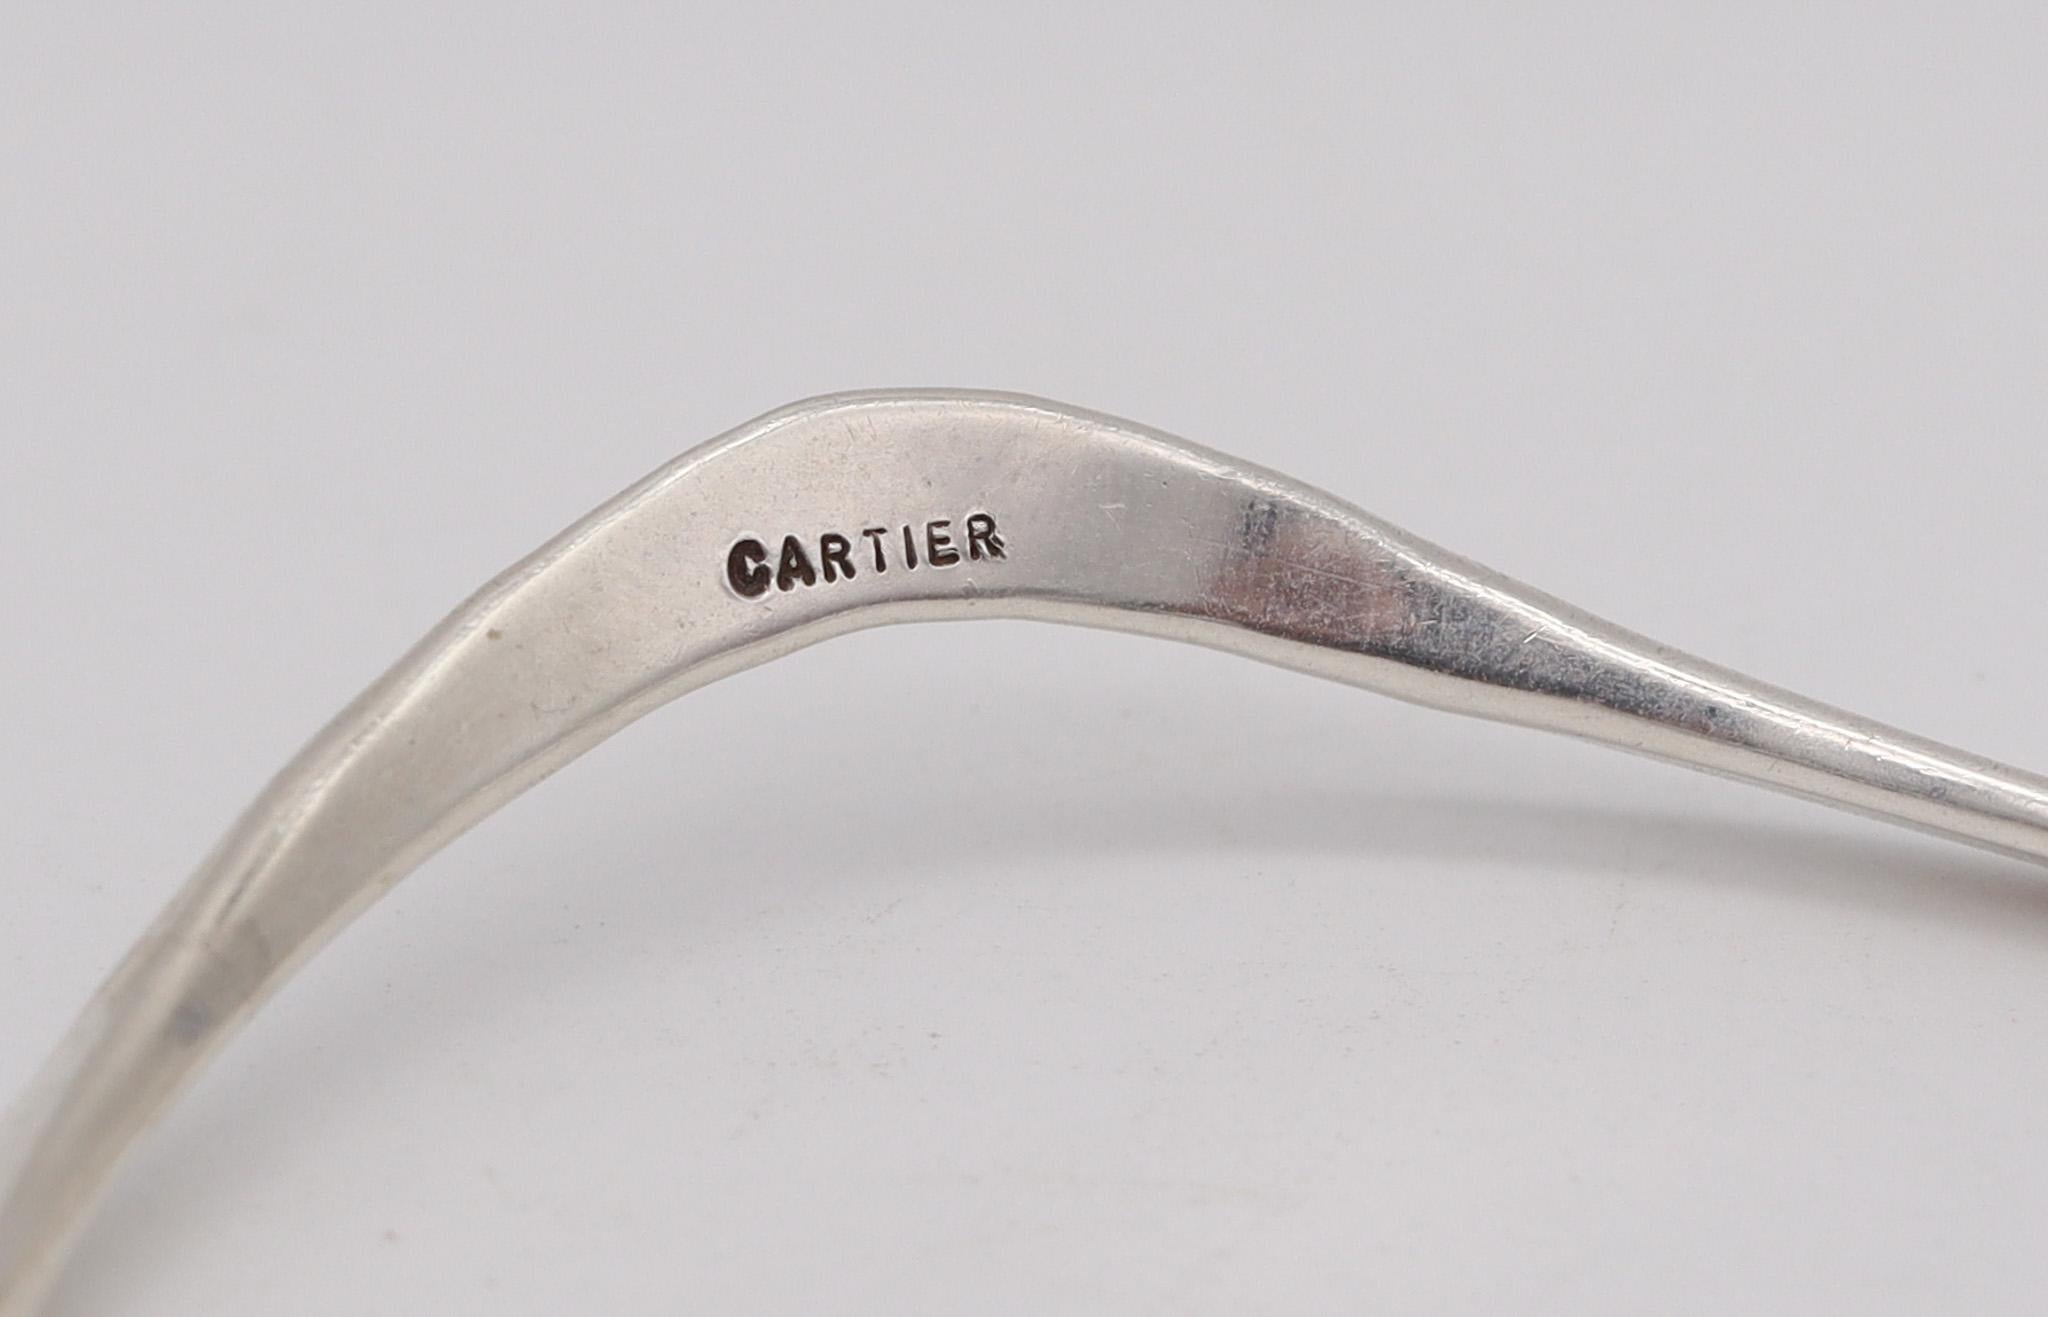 Modernist bangle designed by Jerrold for Cartier.

Very rare bangle bracelet, created by the House of Cartier, back in the 1970. This bangle has been crafted with a modernist wavy shape in solid .925/.999 sterling silver with high polished finish.